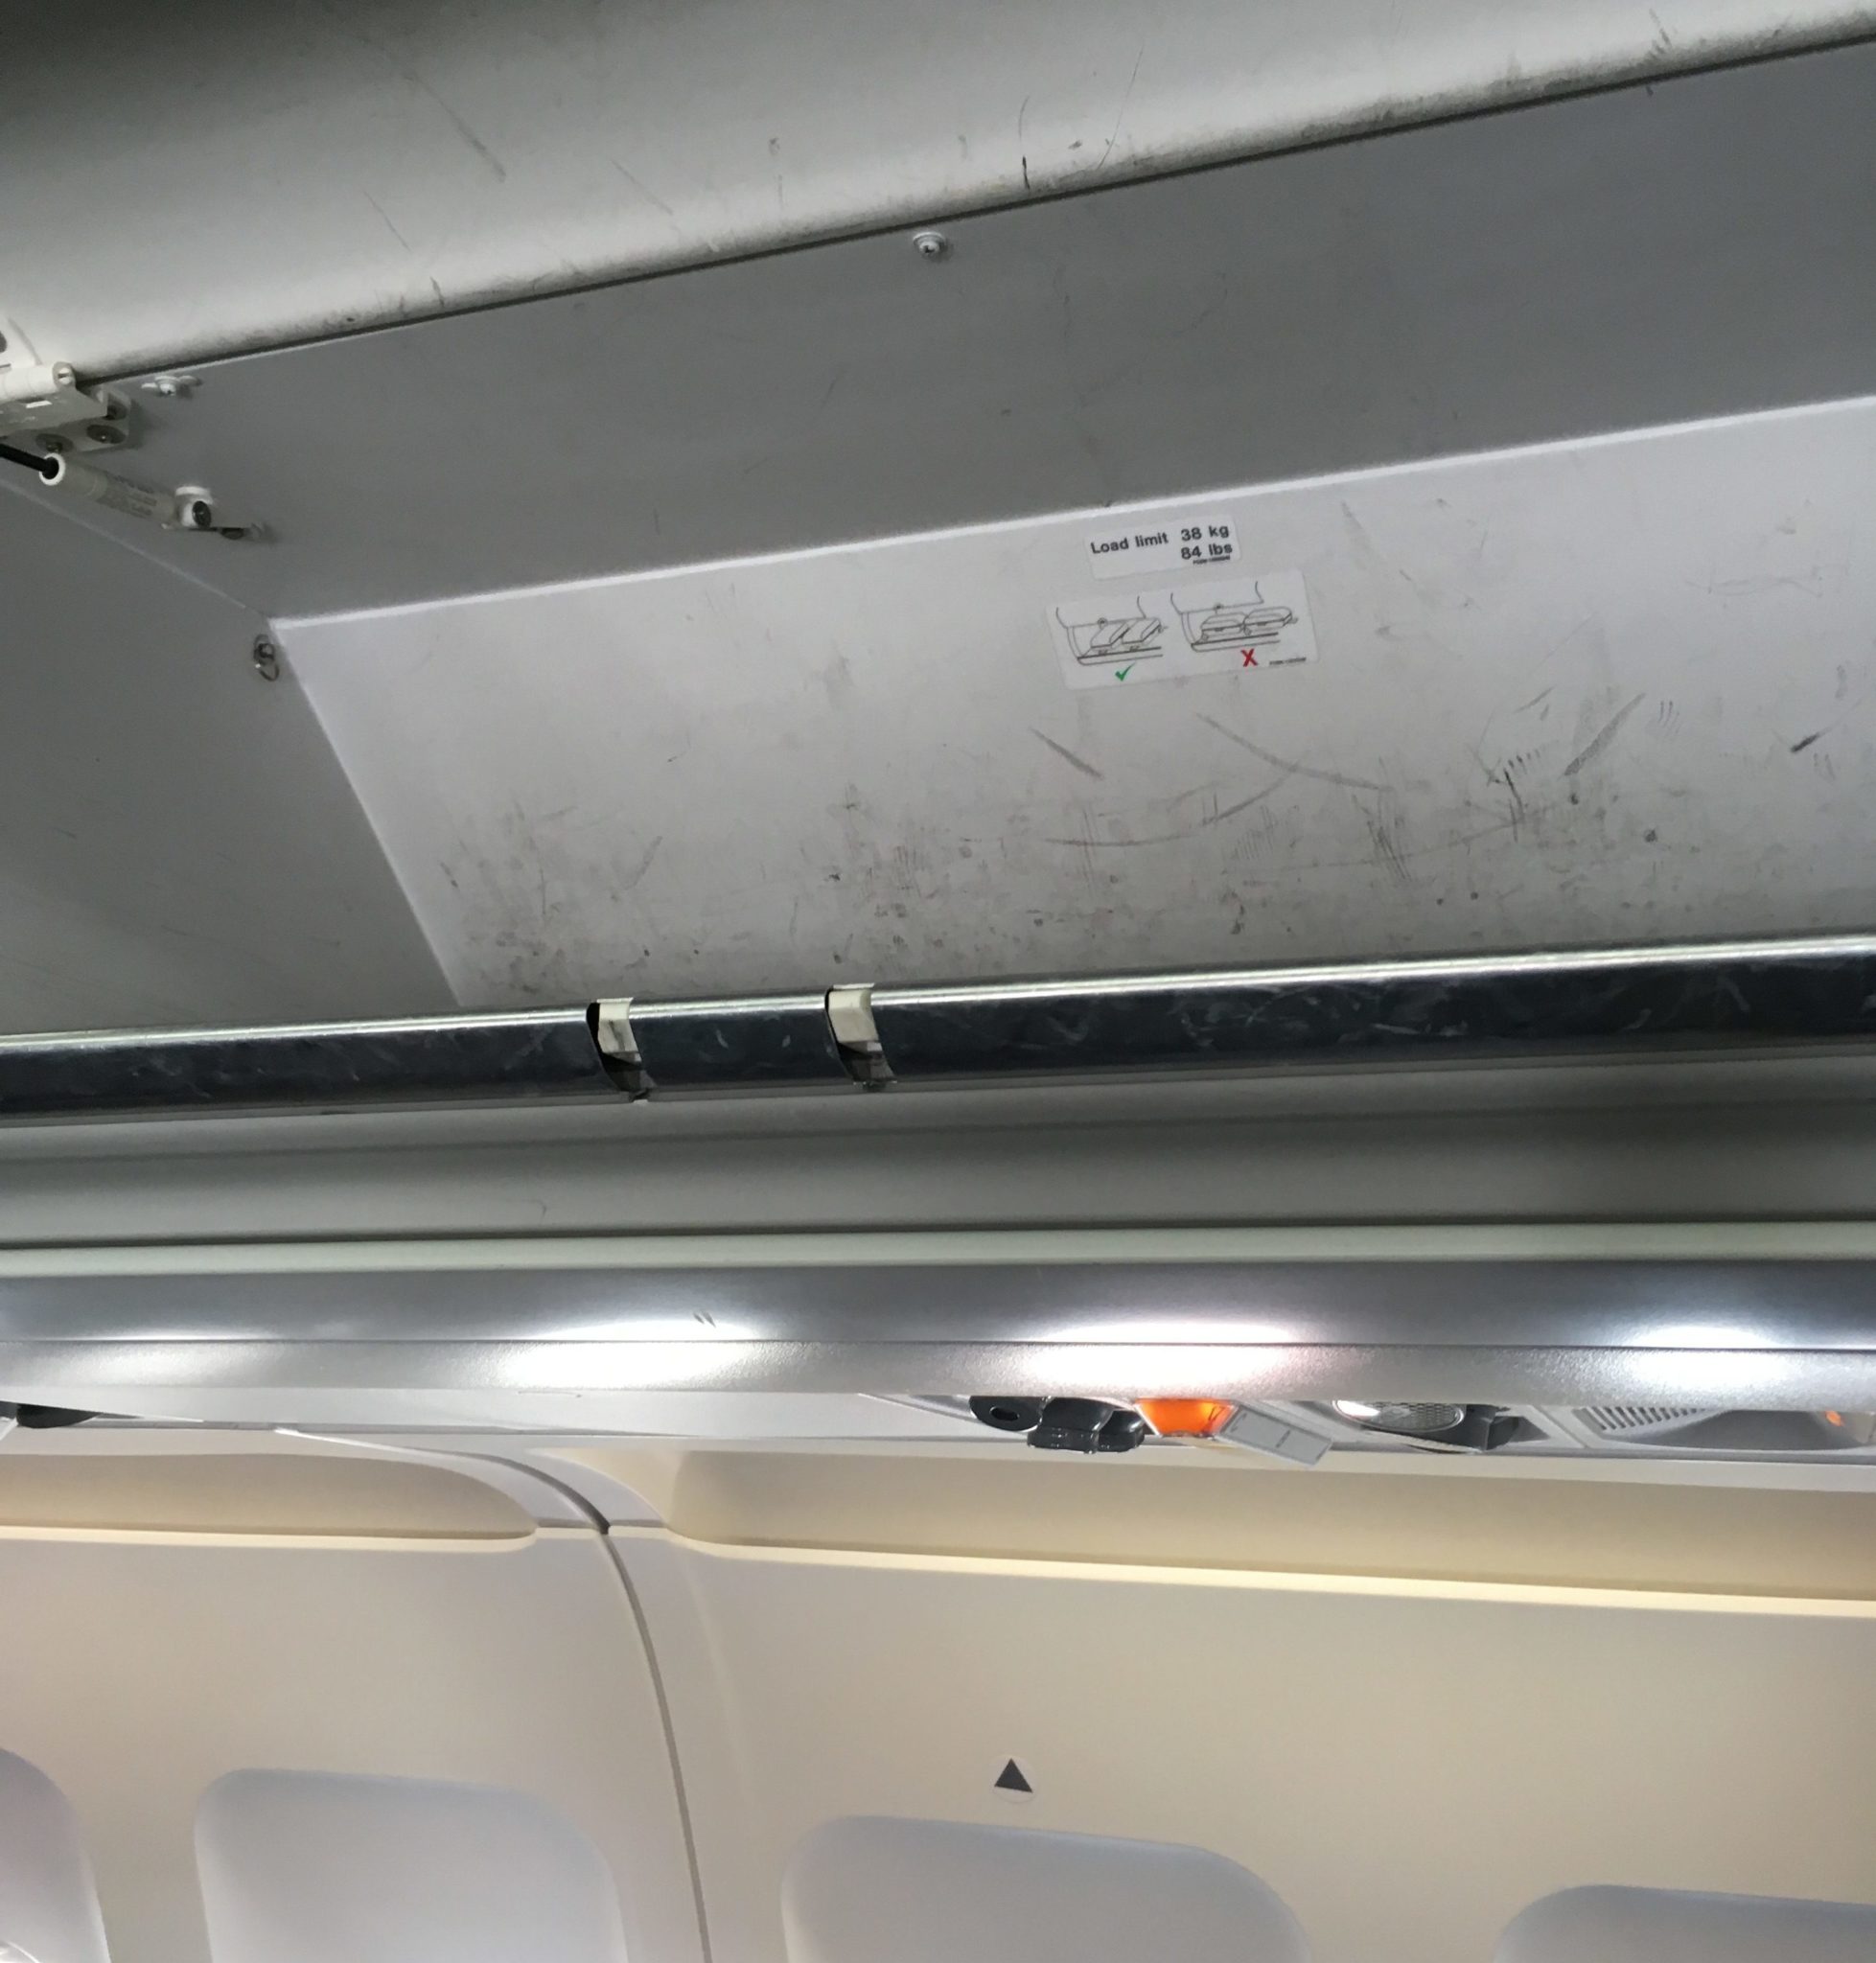 Over head lockers on a British Airways Airbus A320